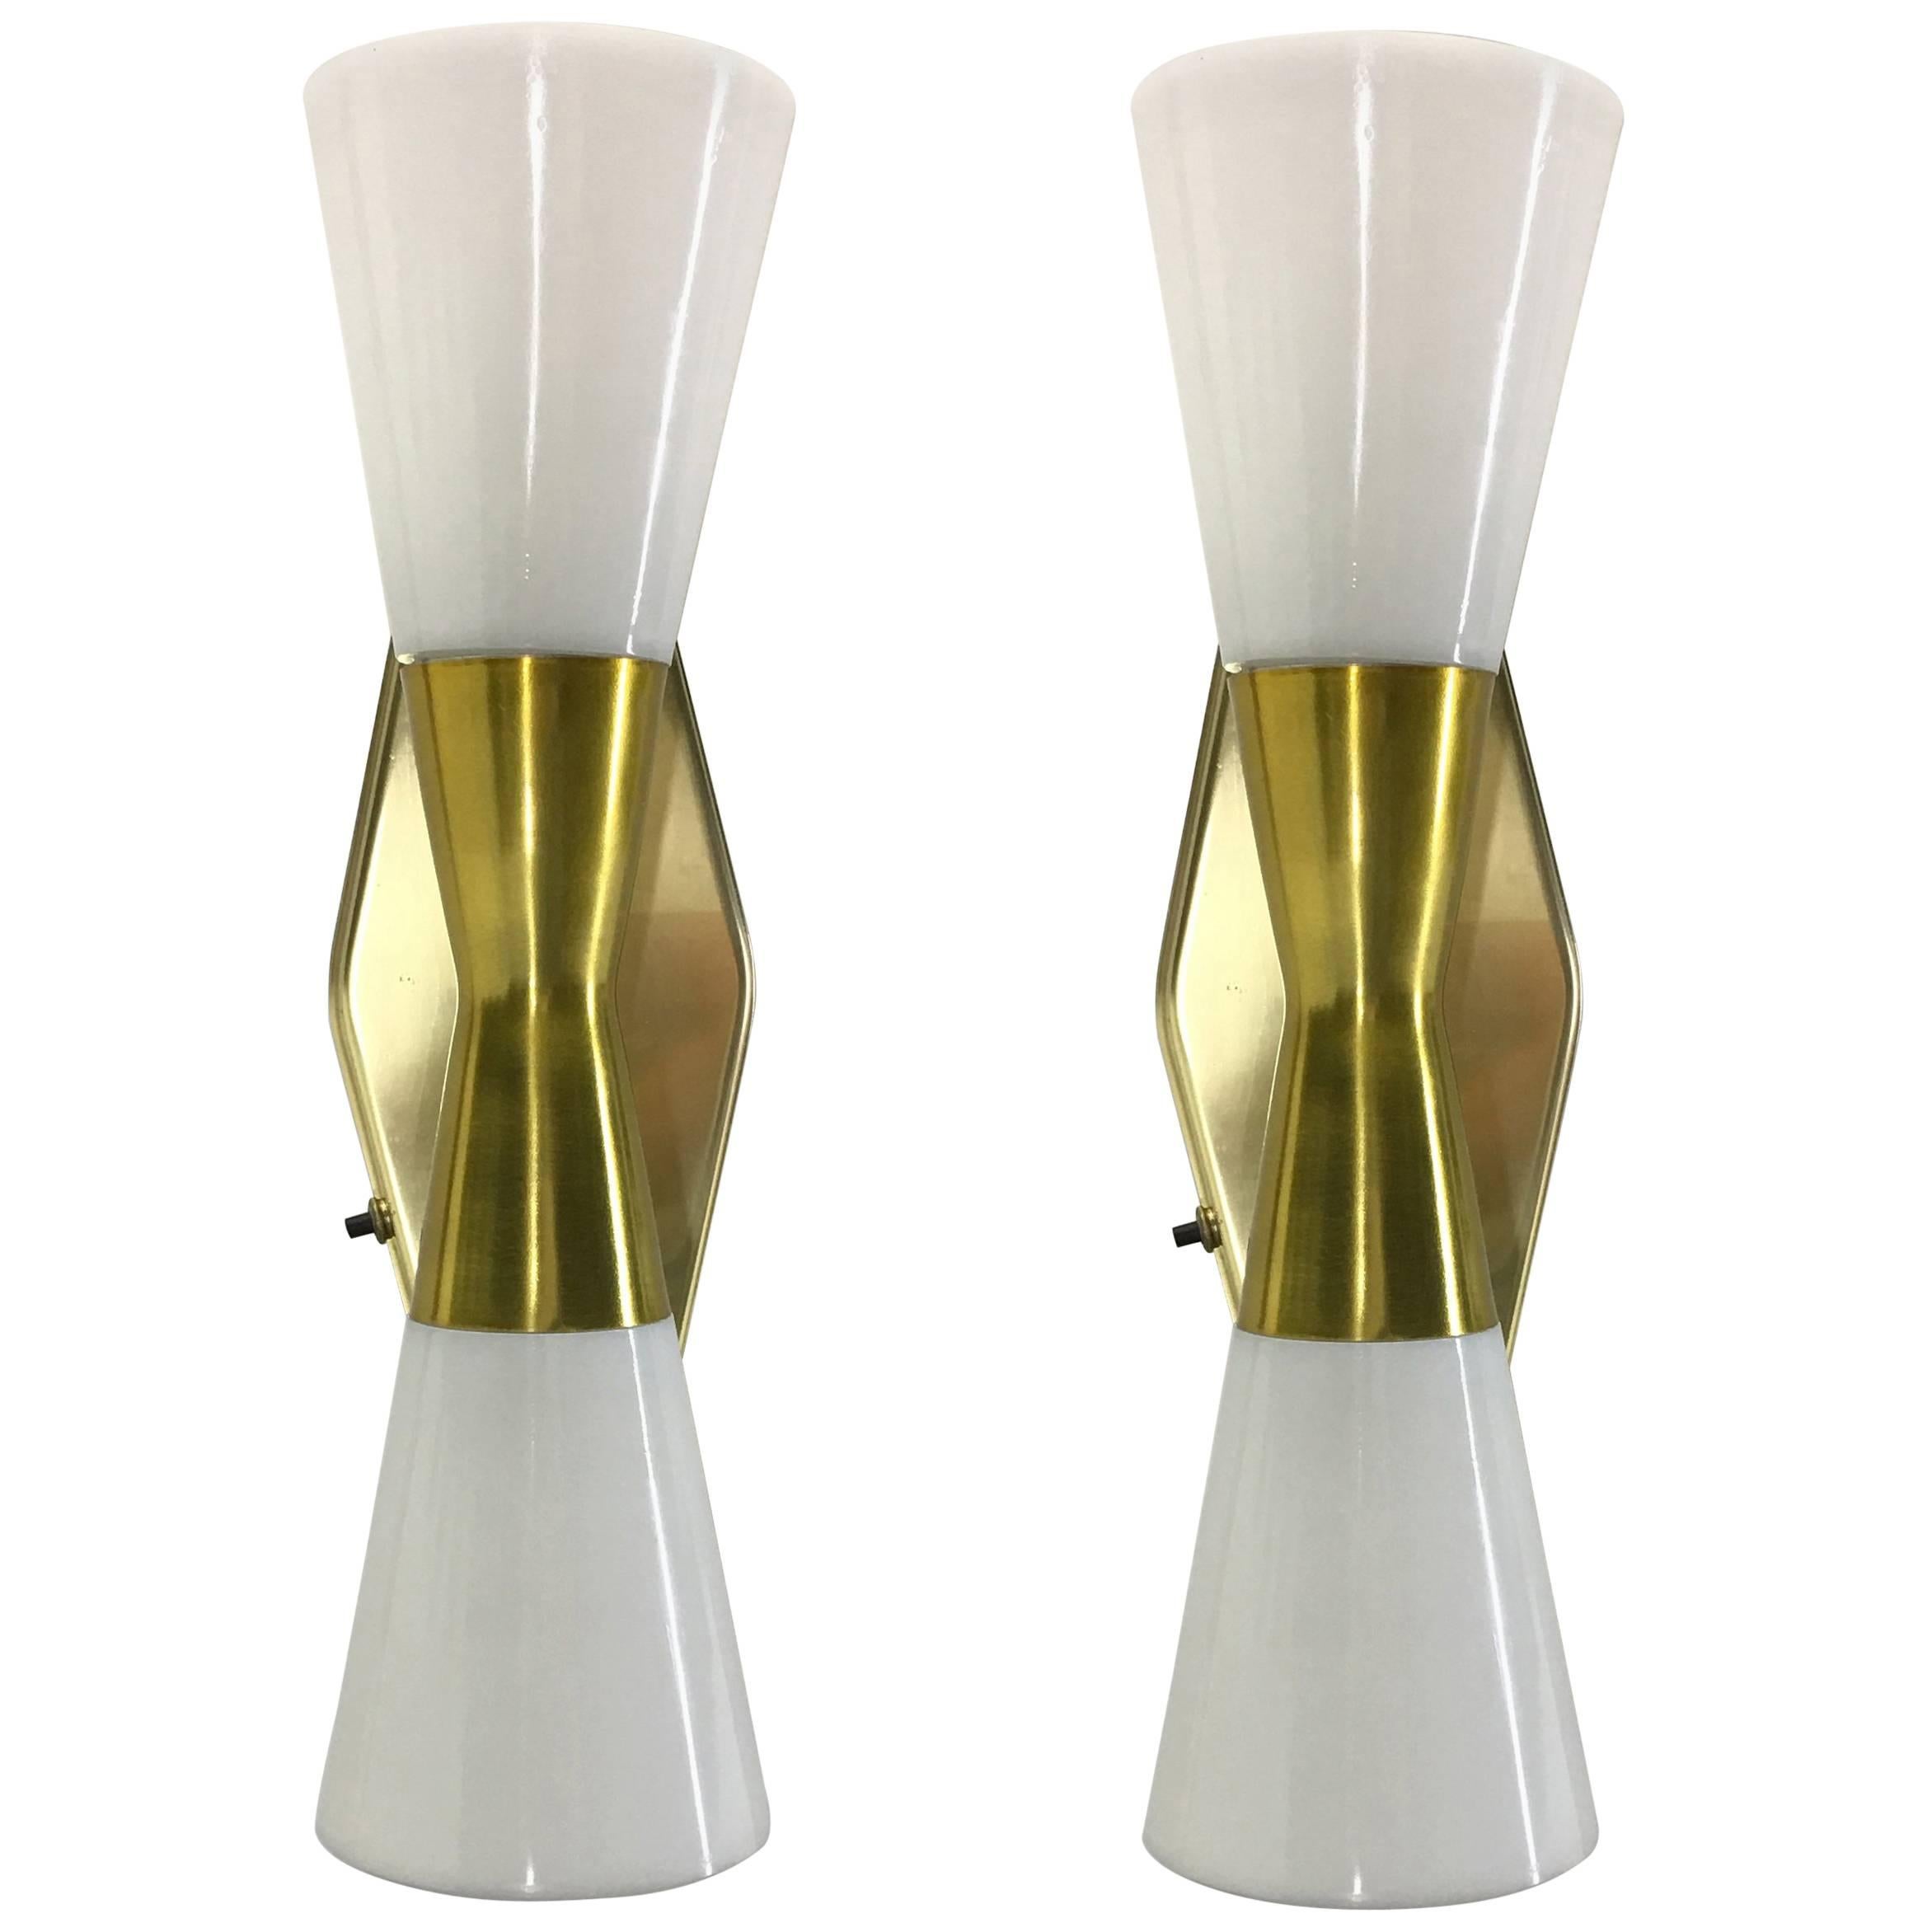 Vintage Pair of Wall Bow Tie Sconces by Virden Lighting